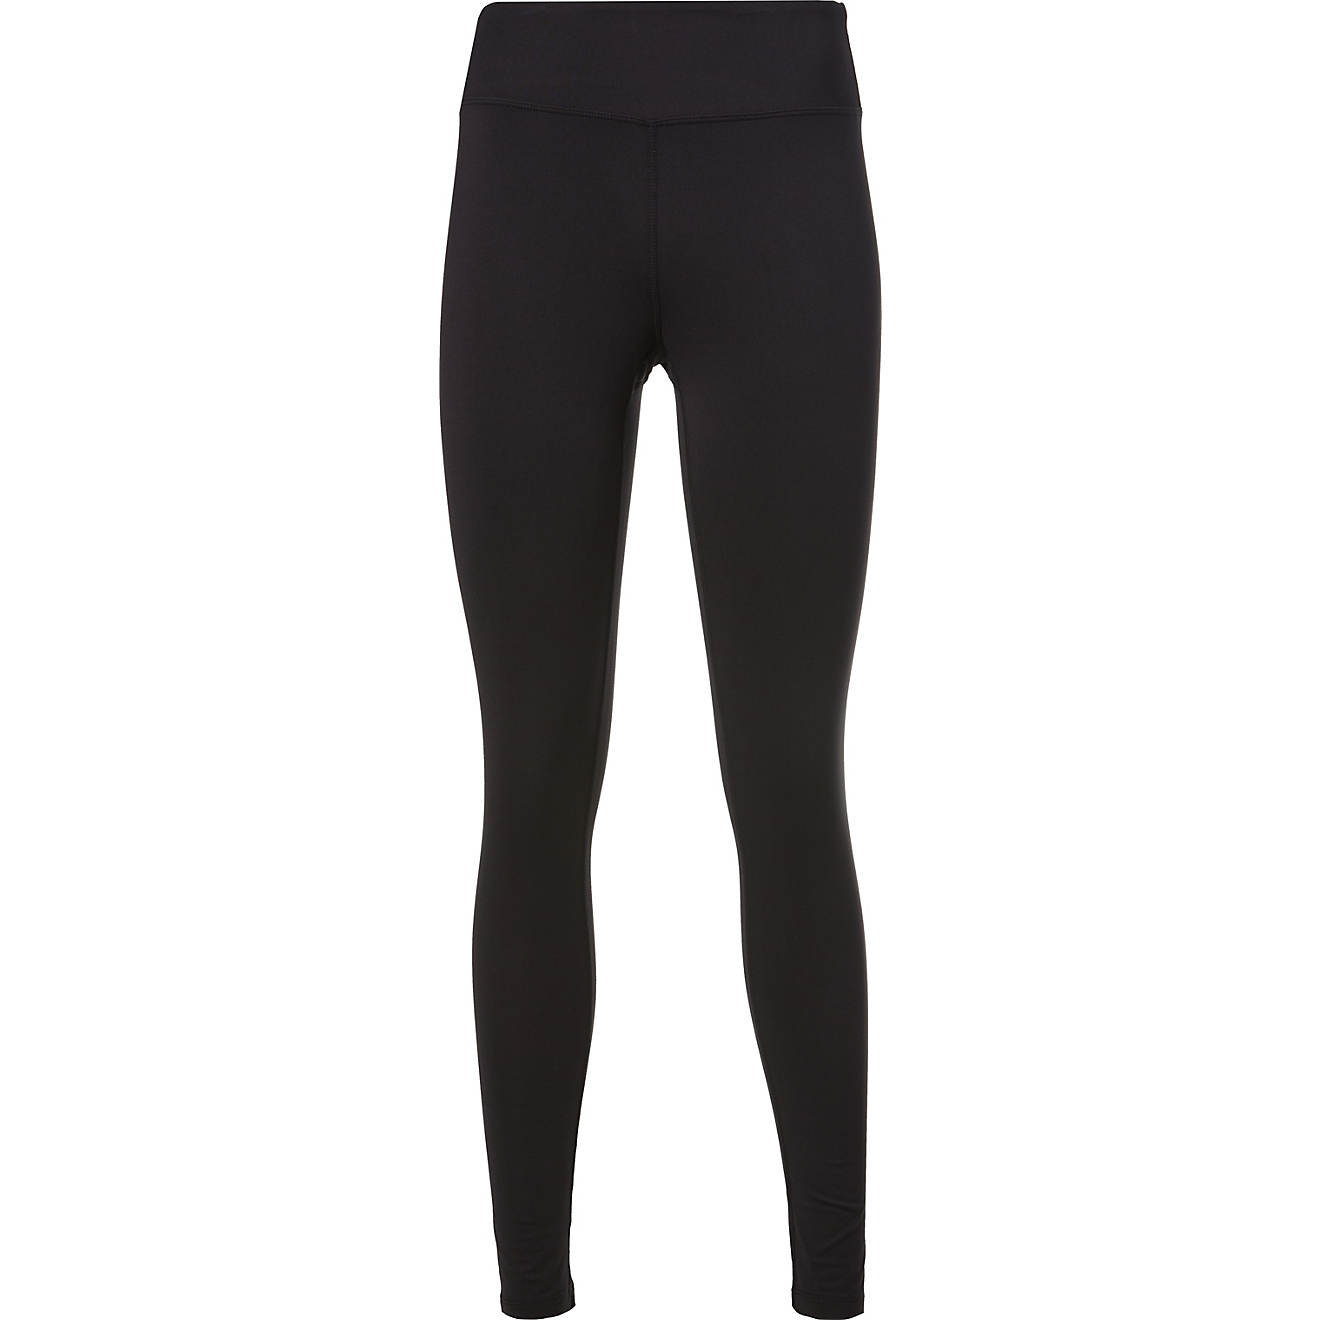 Magellan Outdoors Women’s Thermal Stretch Baselayer Pants | Academy